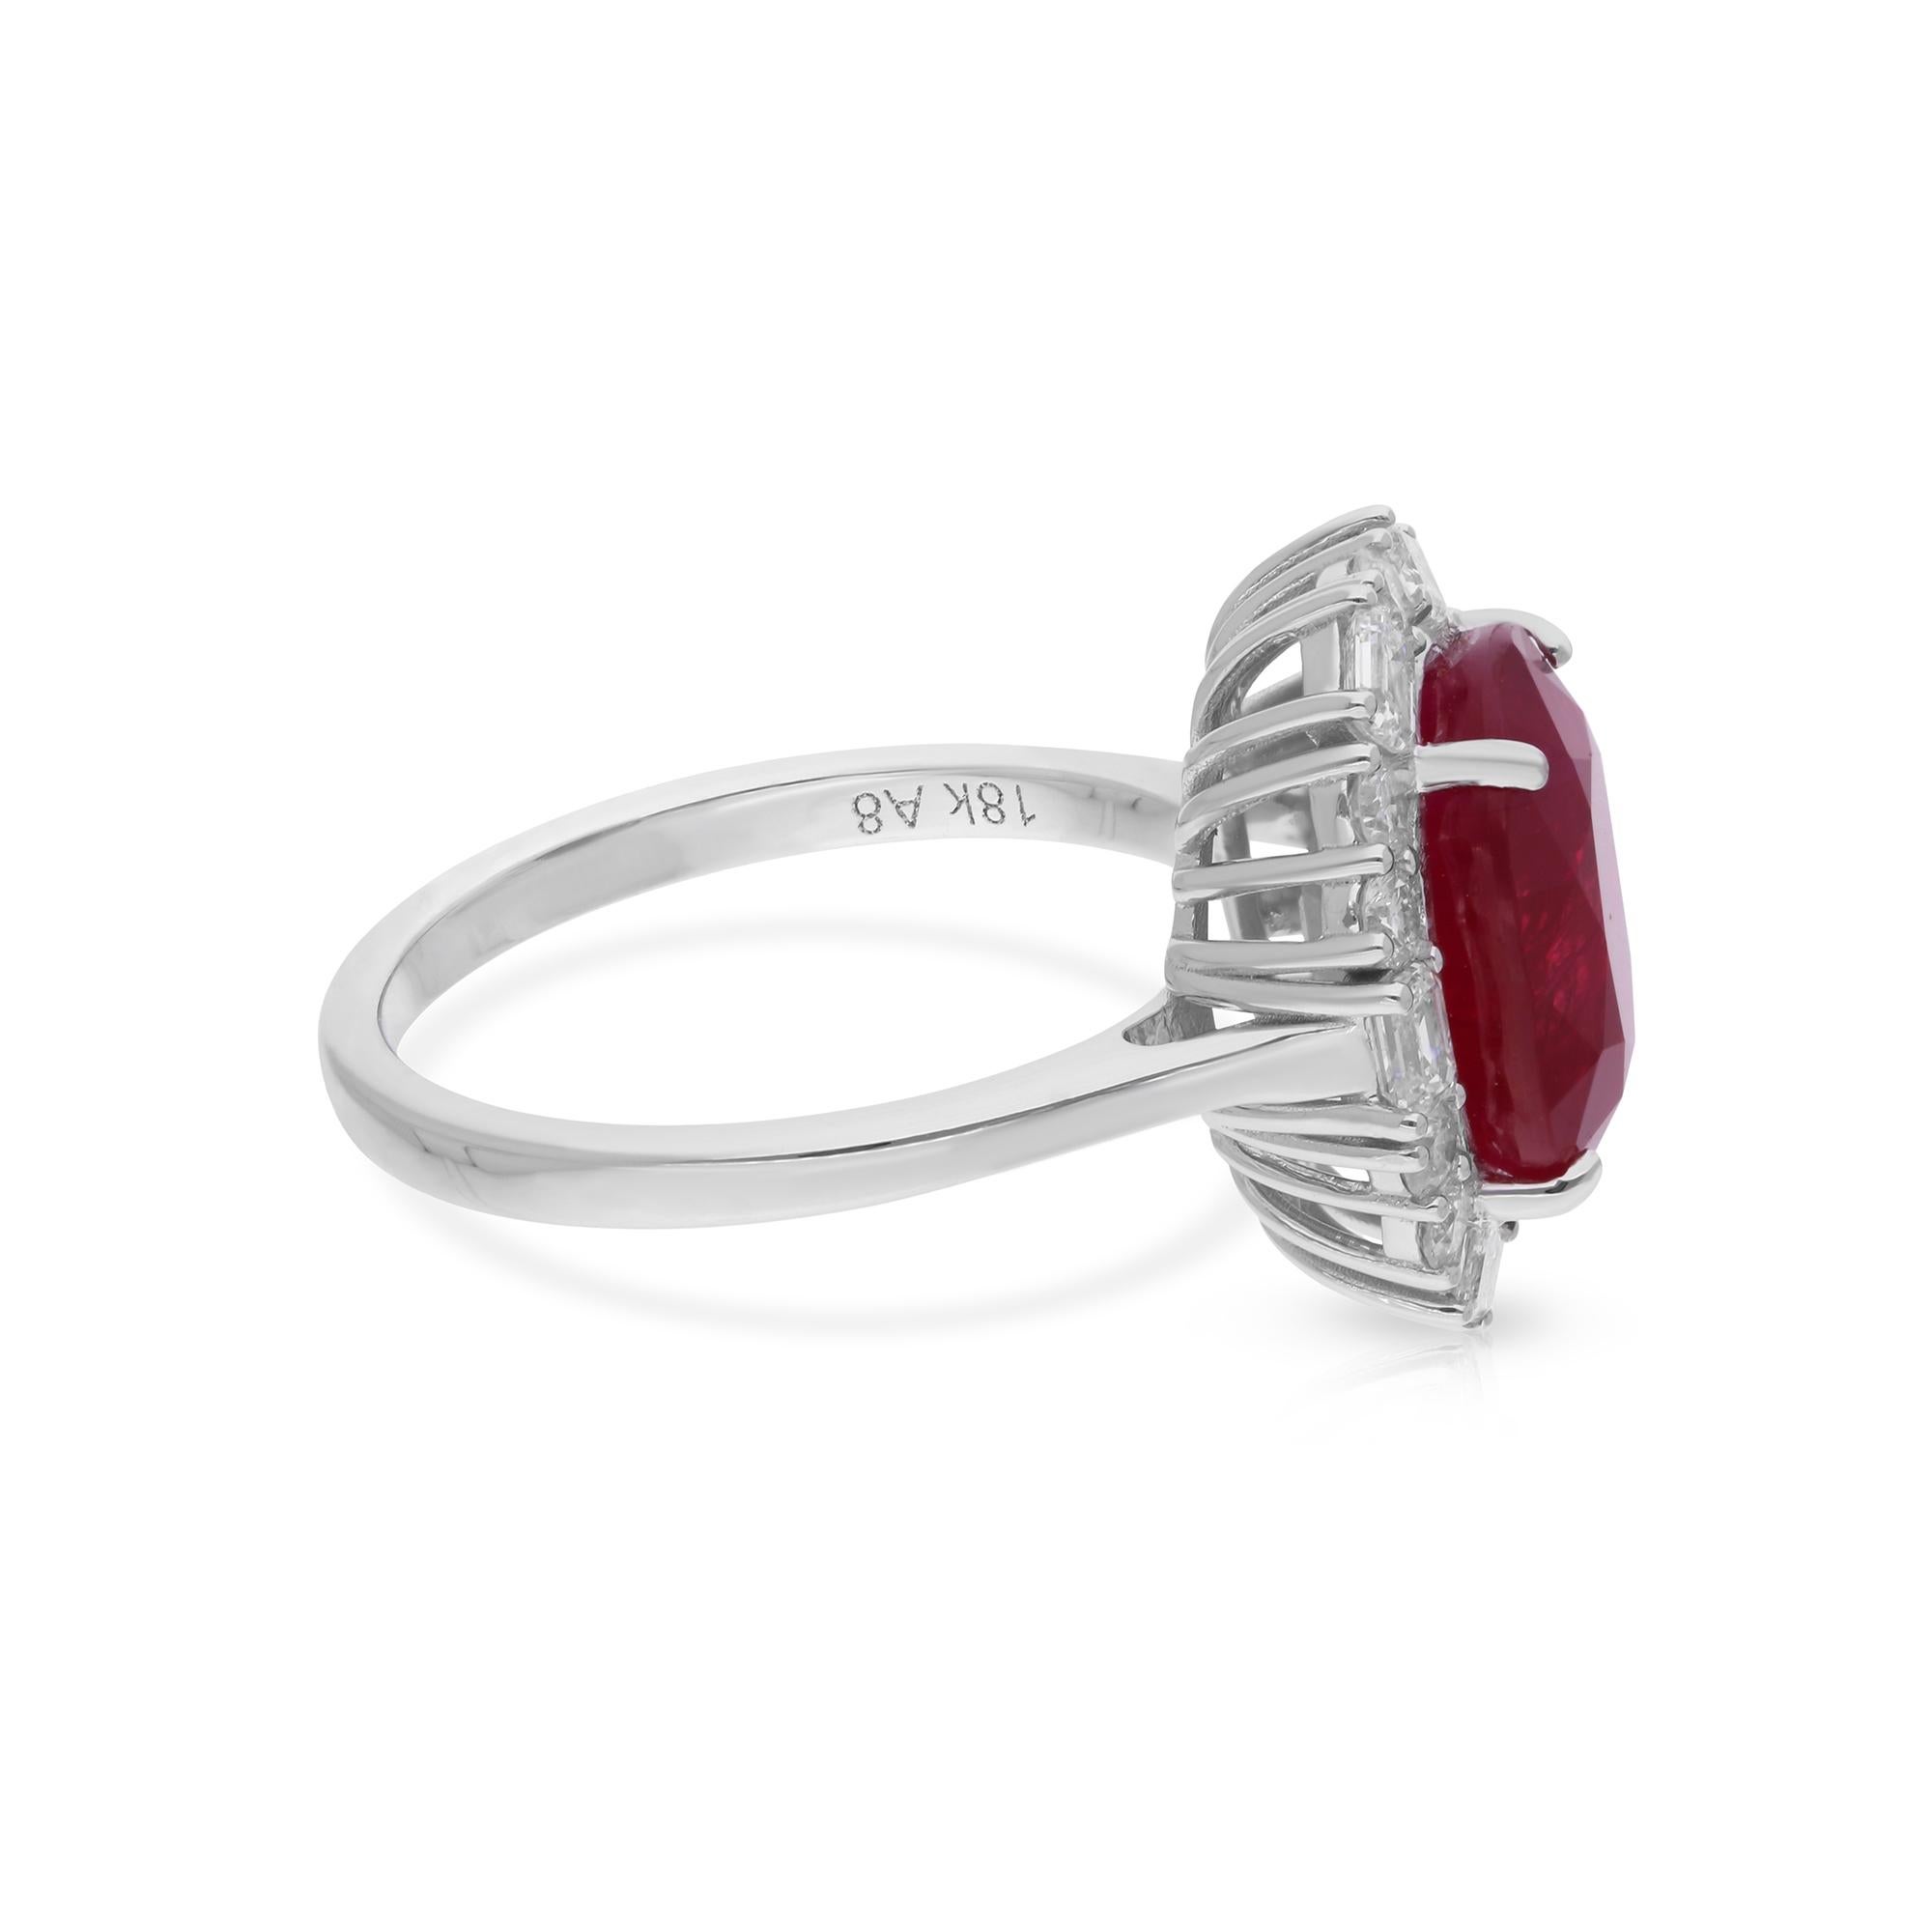 Immerse yourself in the world of refined luxury and timeless sophistication with this breathtaking Oval Ruby Gemstone Cocktail Ring, adorned with diamonds and meticulously crafted in 18 Karat White Gold. Handmade by skilled artisans, this exquisite